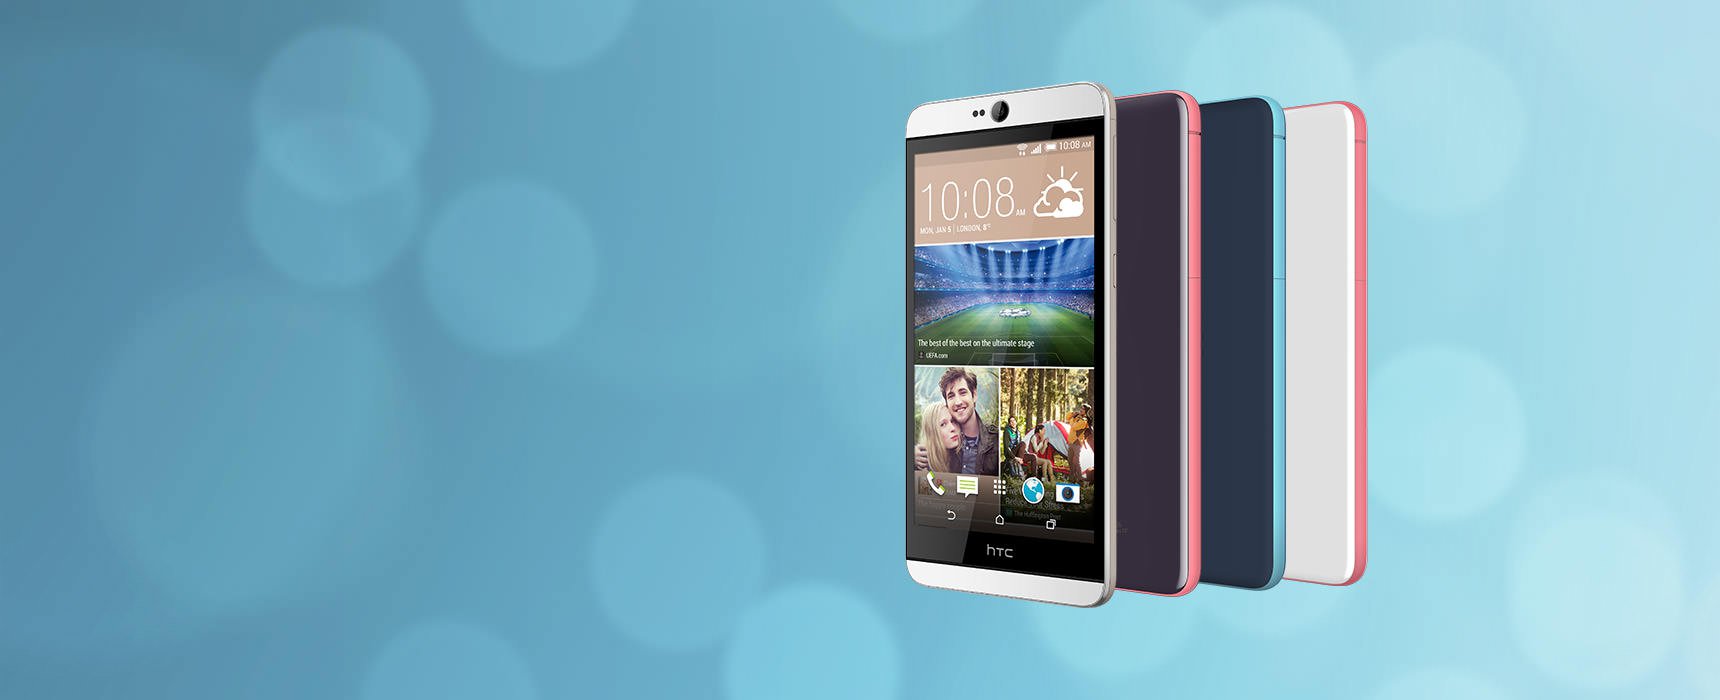 HTC Desire 826 Launched On CES 2015